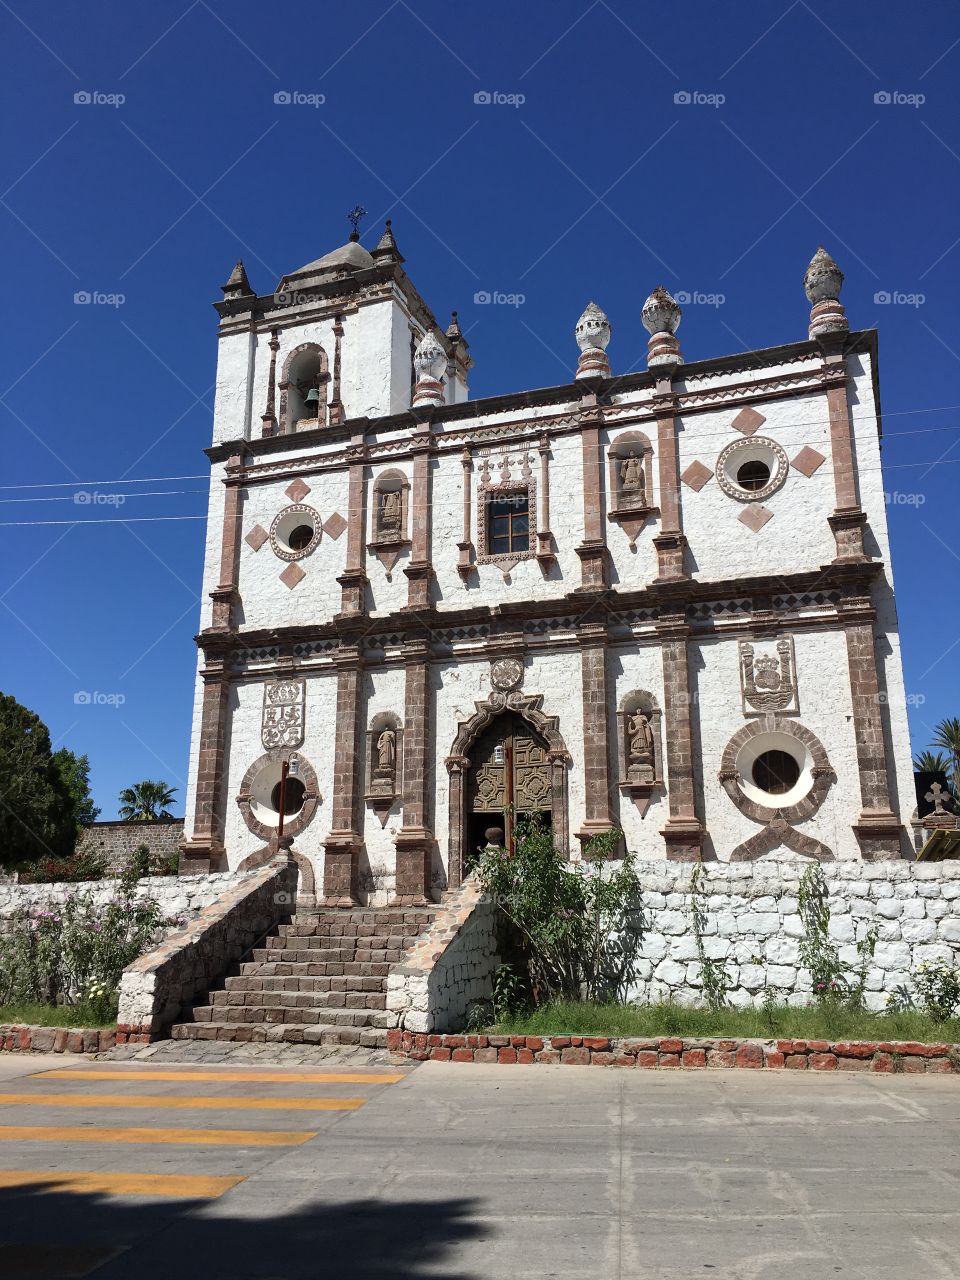 A beautiful old church in Mexico on a clear blue day. 